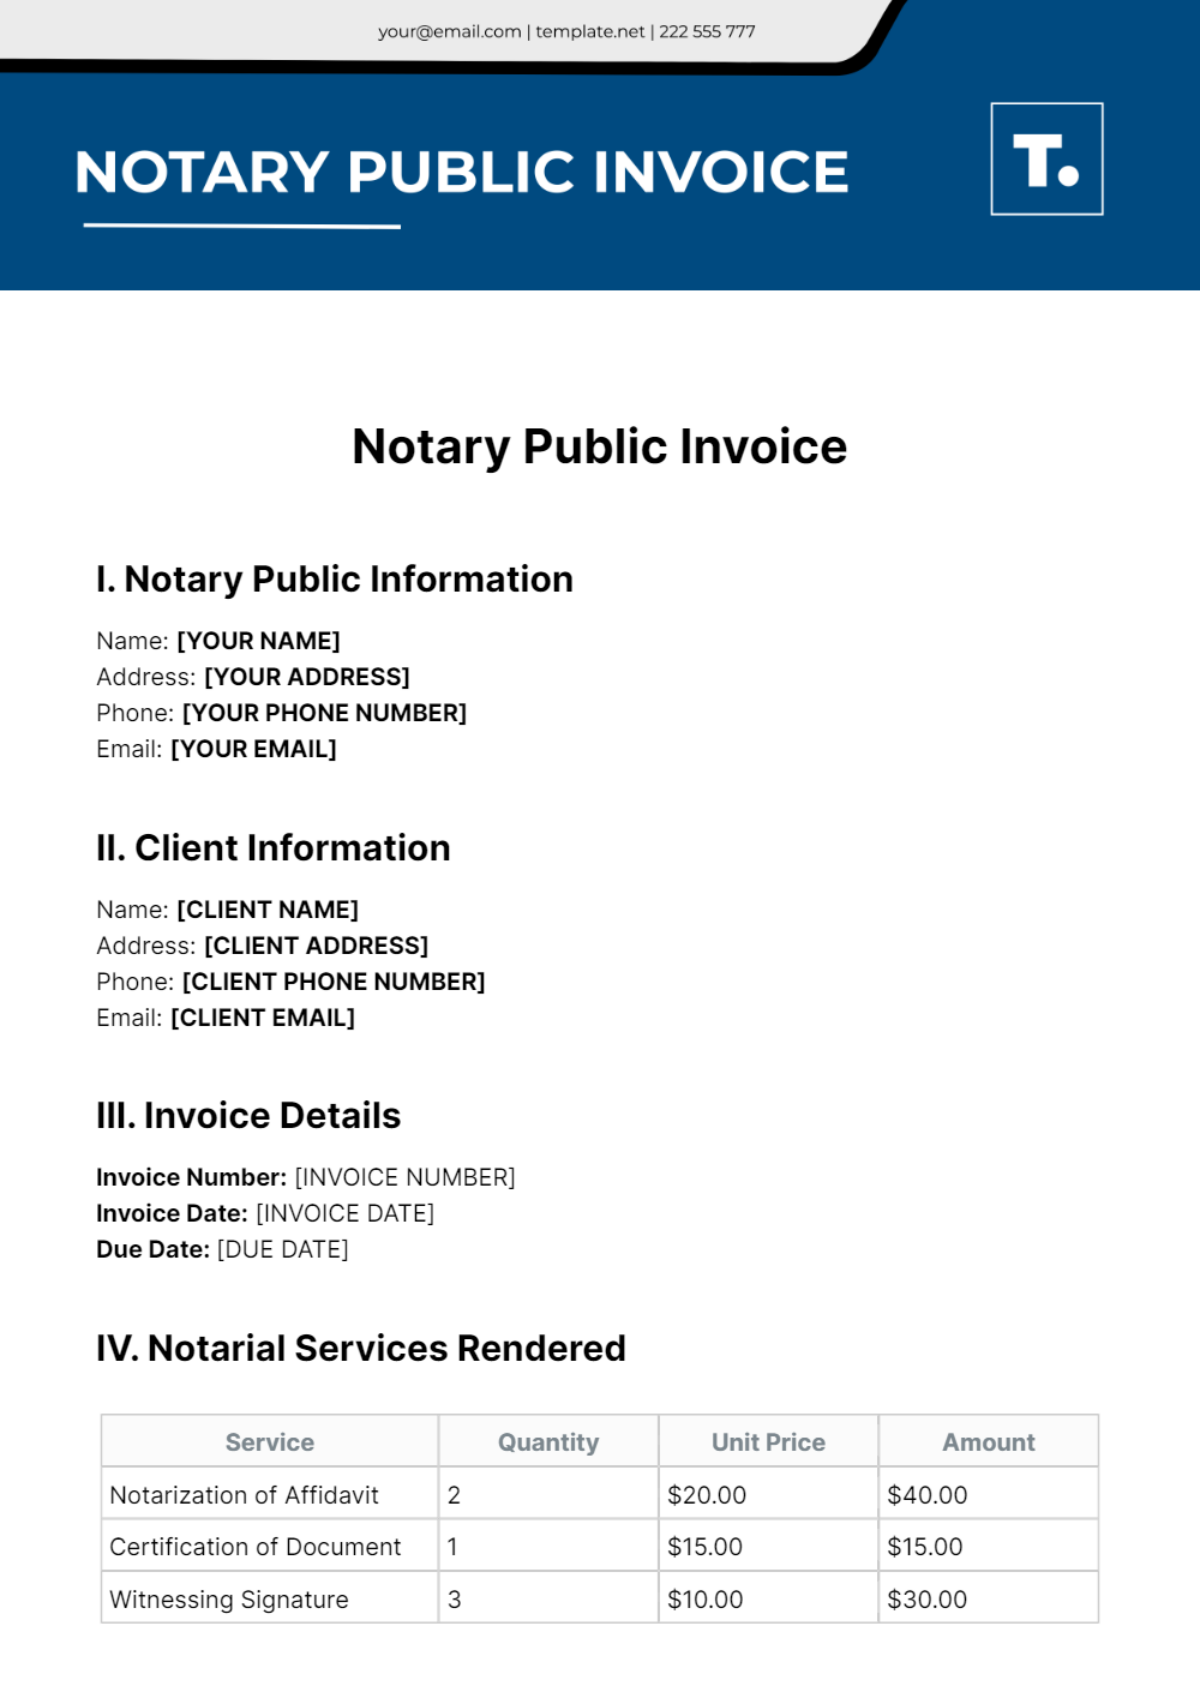 Free Notary Public Invoice Template